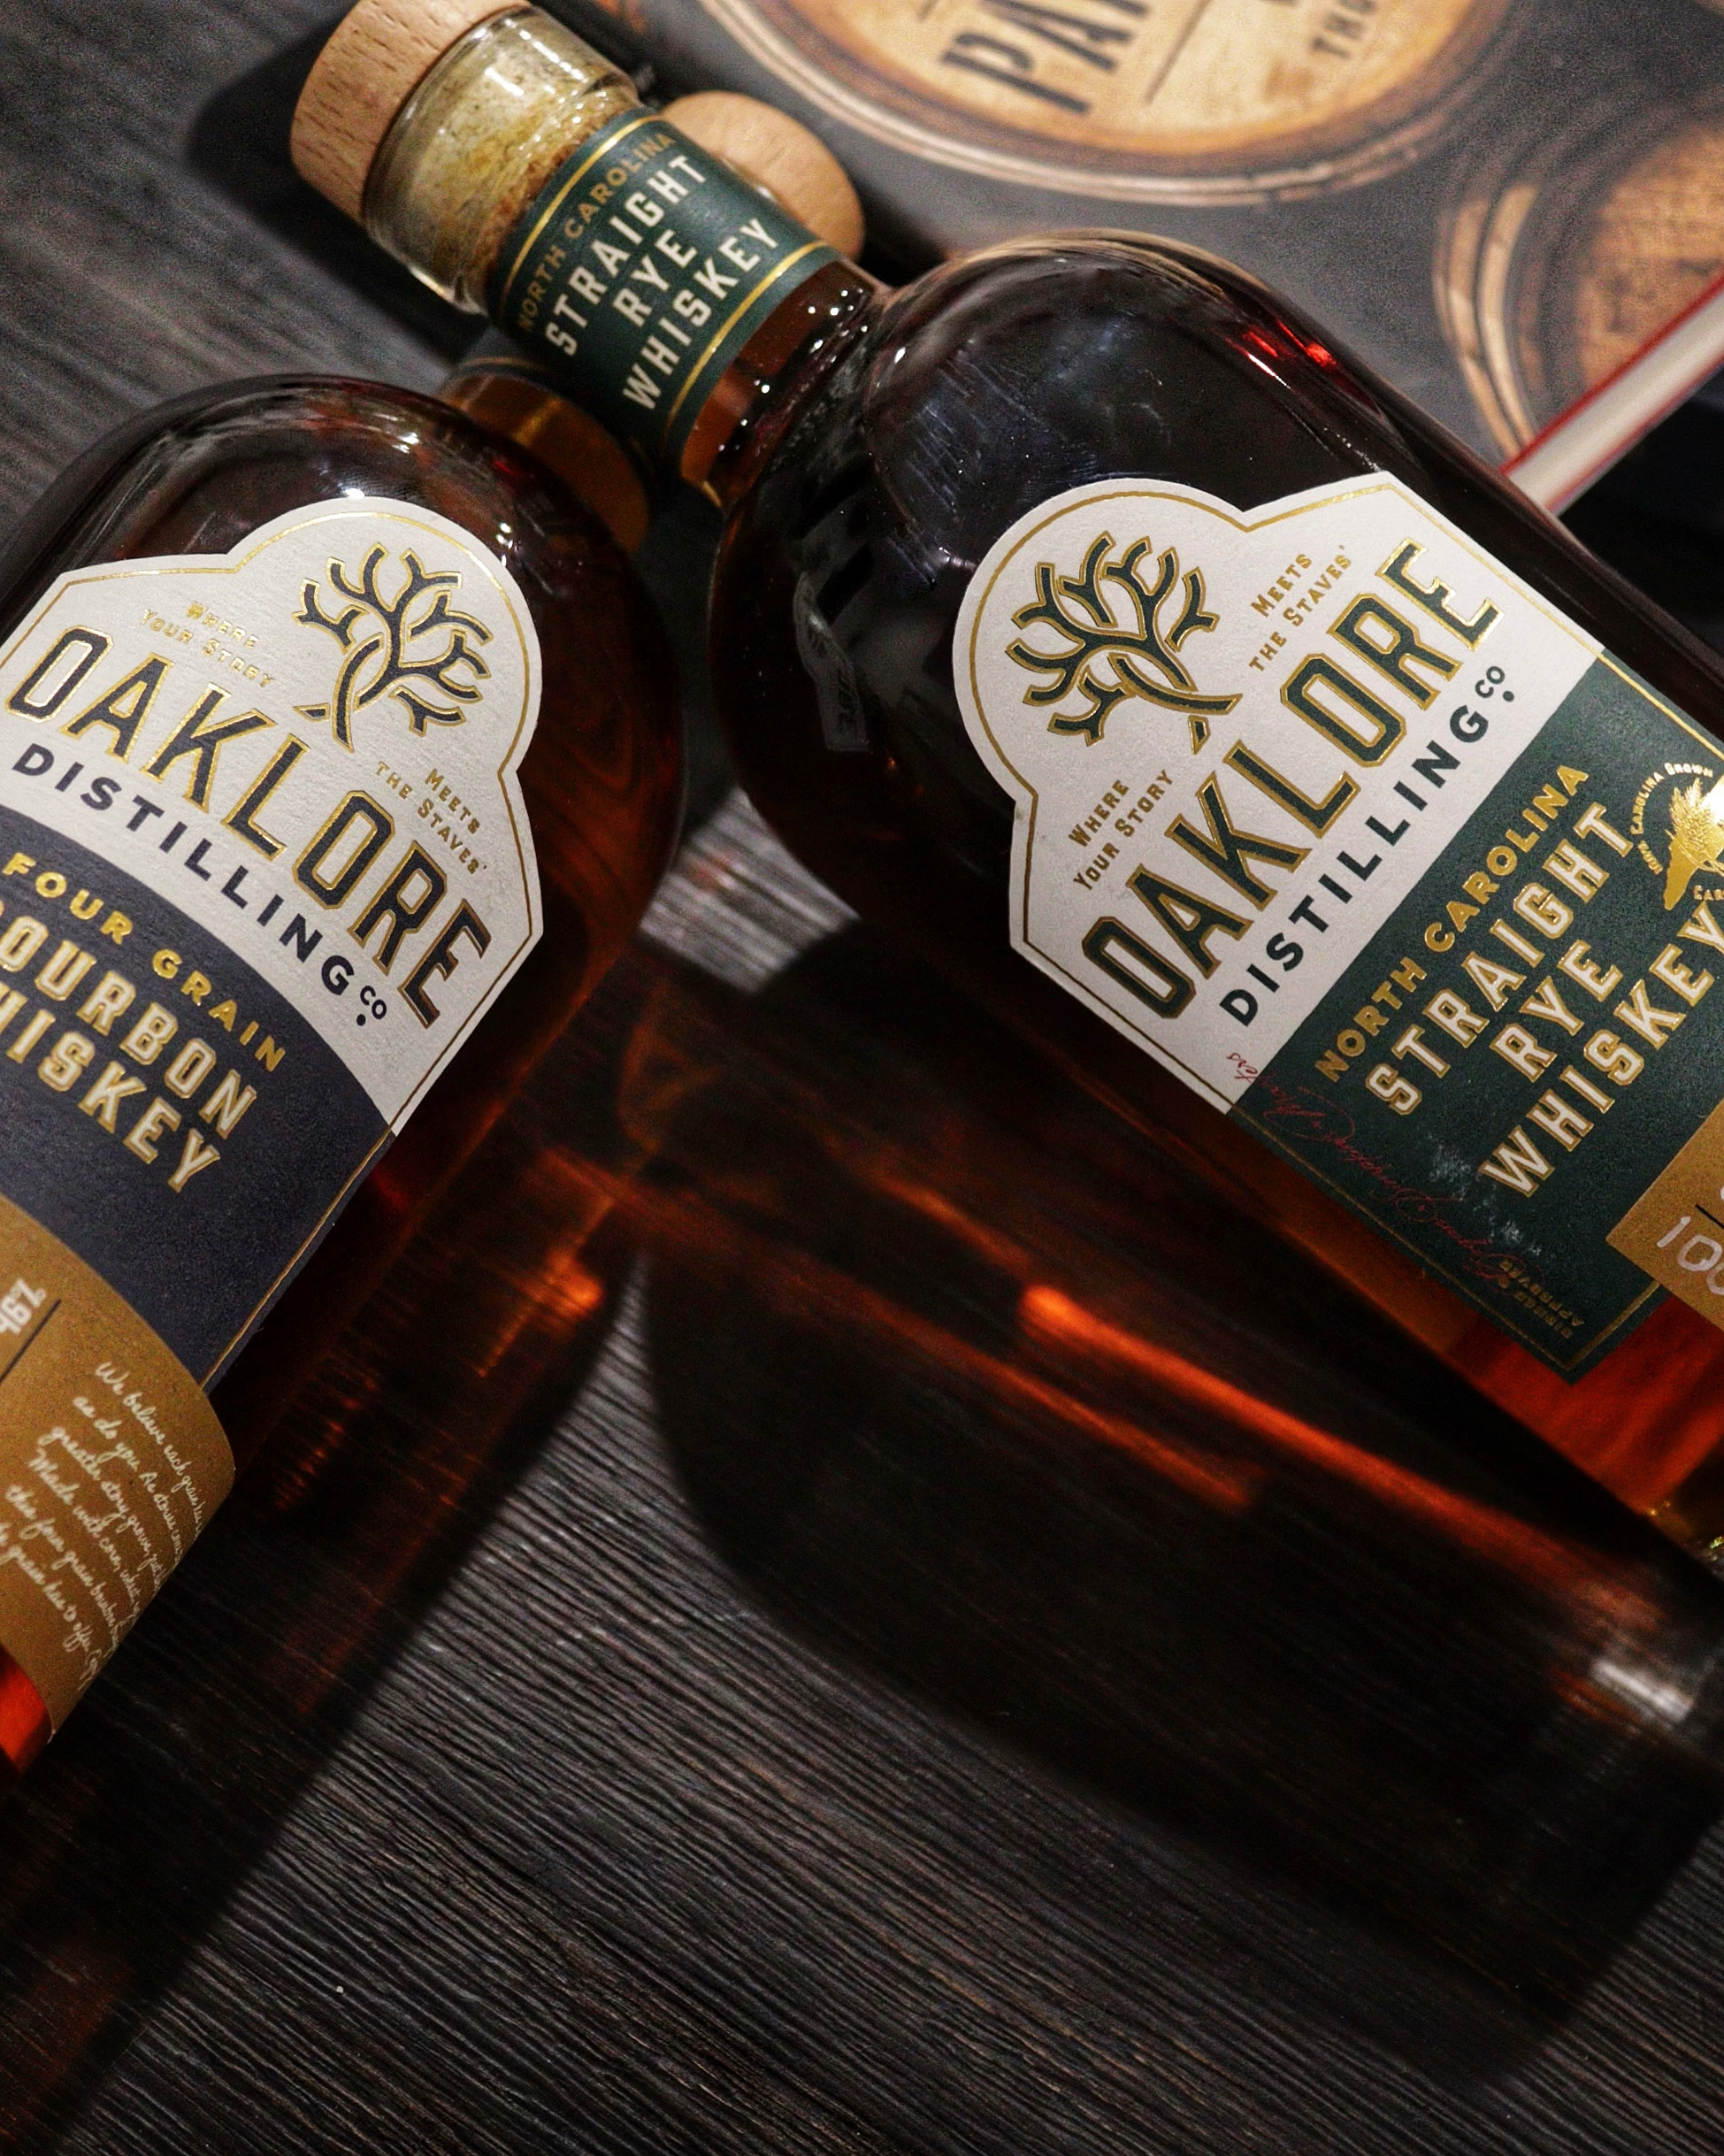 The Surprisingly Bold Flavors Of Oaklore Distilling Co. Whiskeys